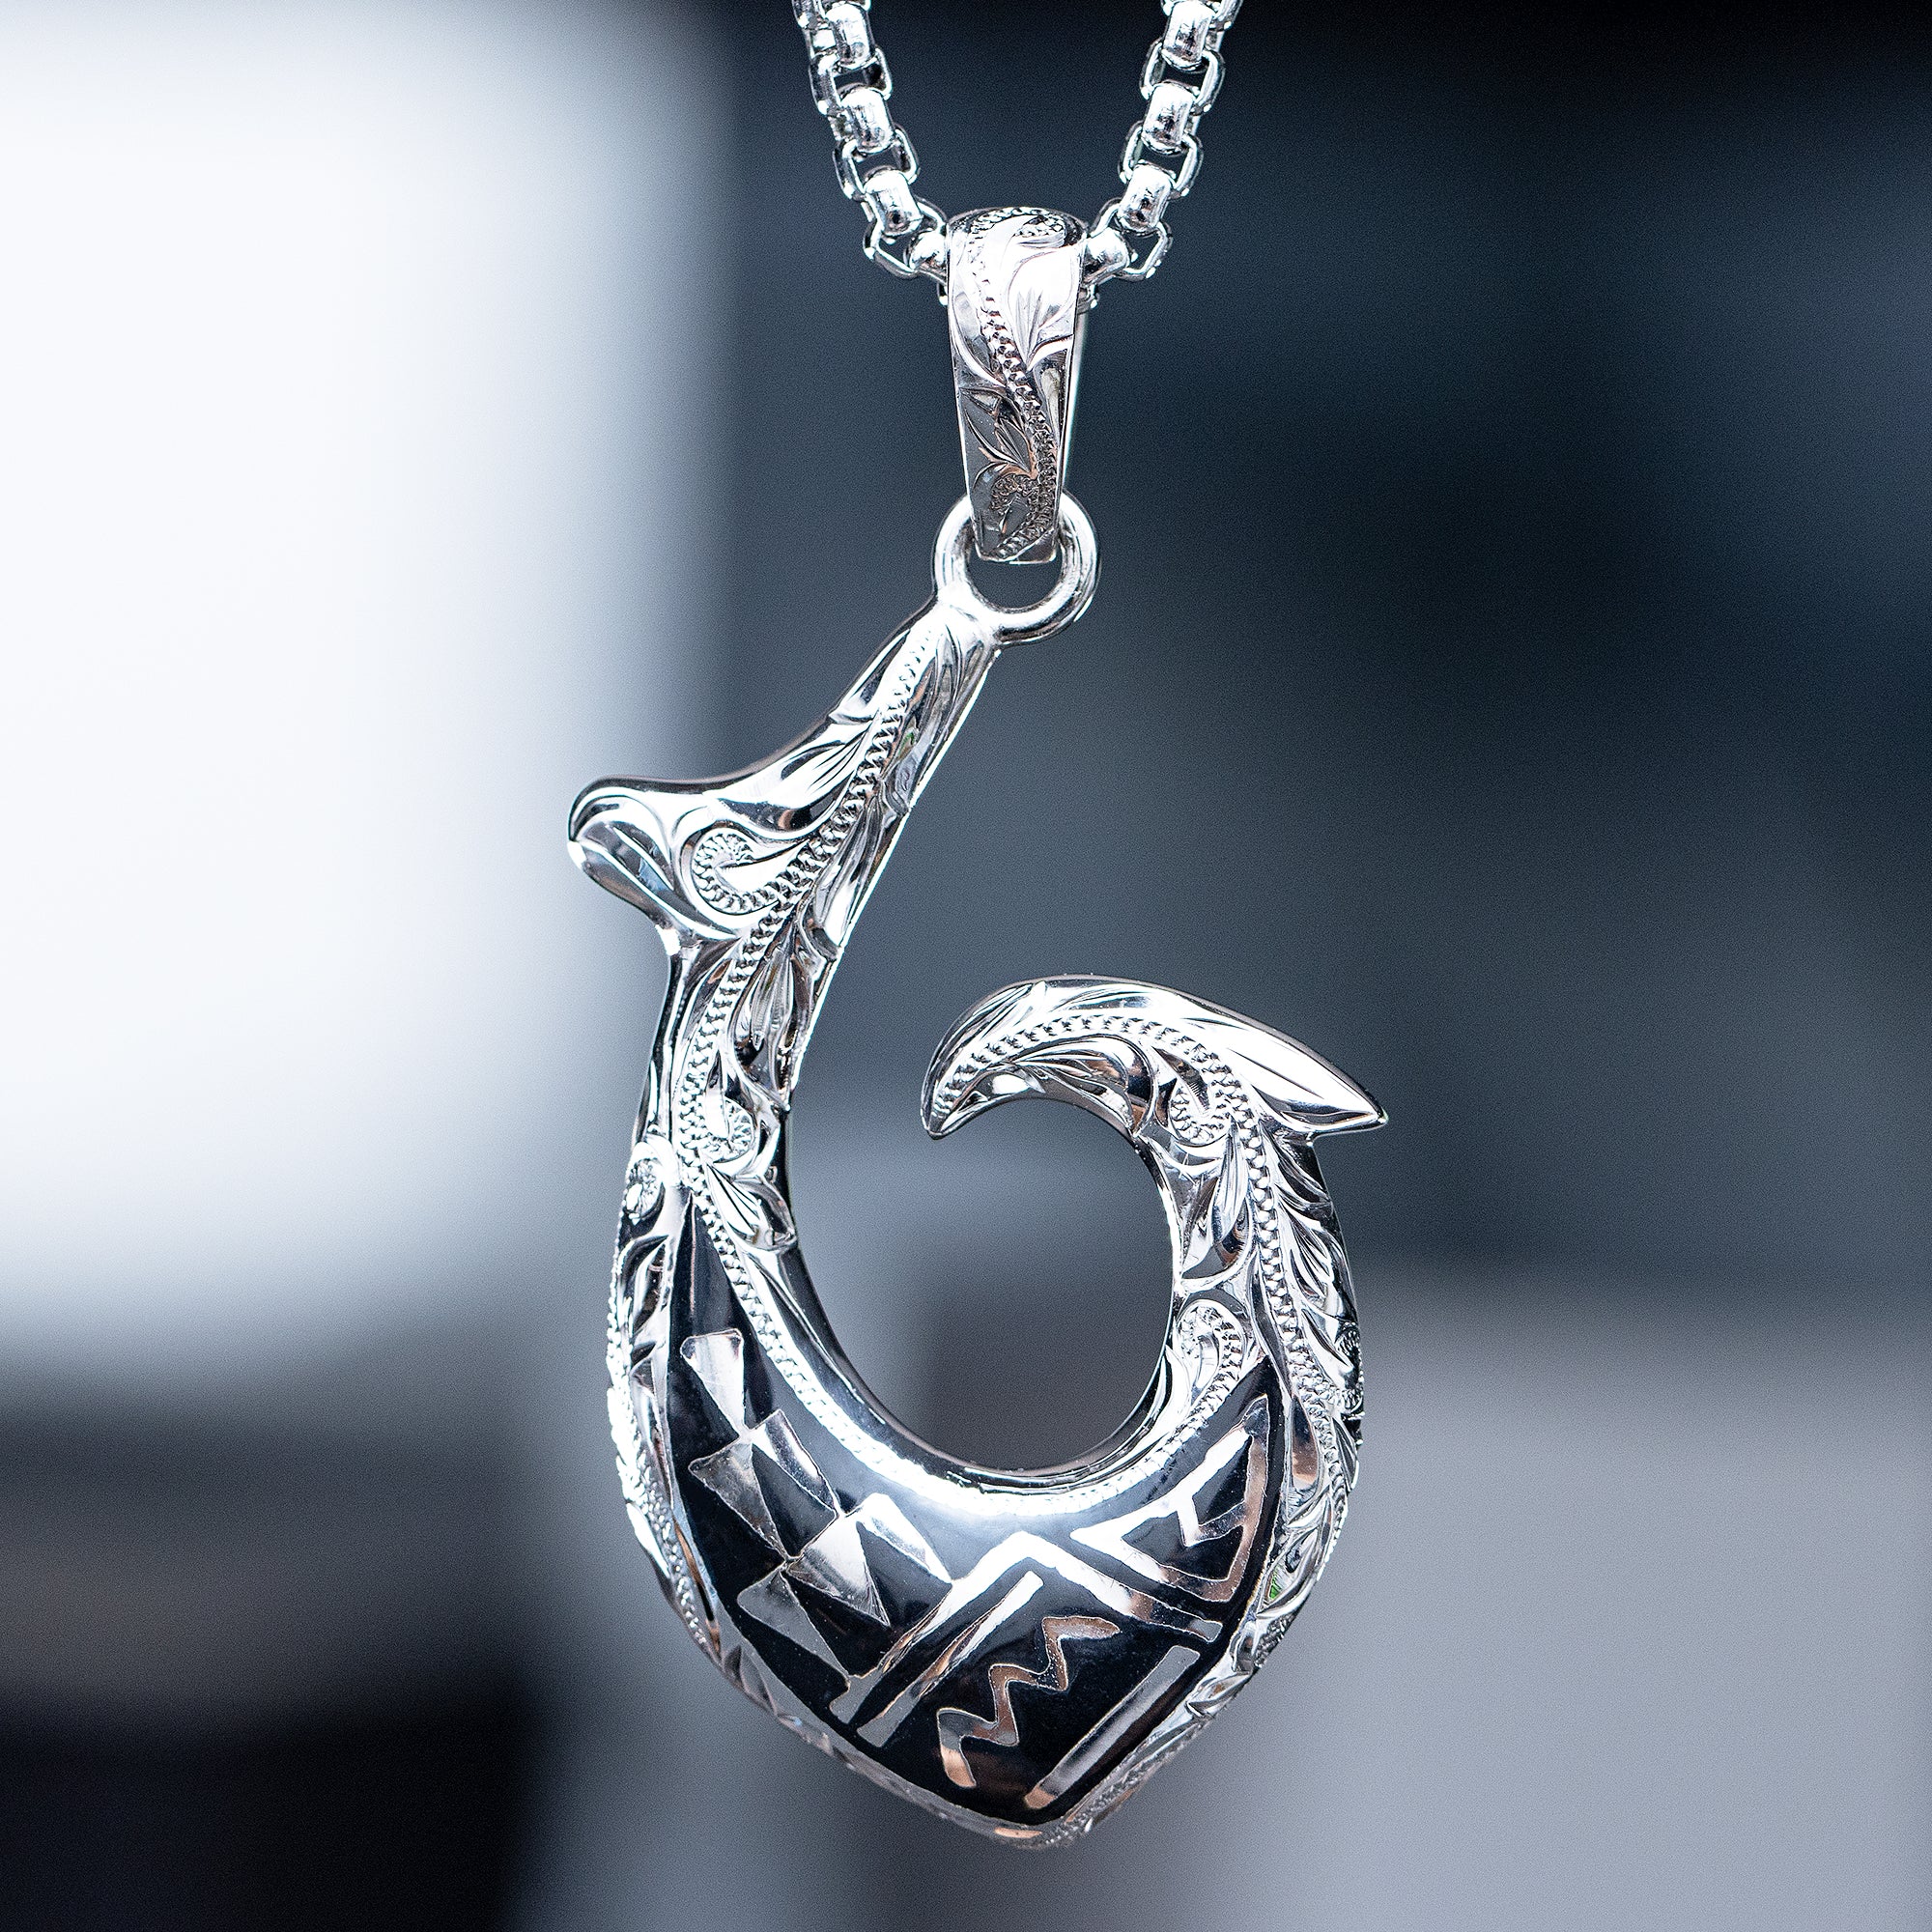 Sterling Silver Large Hawaiian Fish Hook Pendant on a Sterling Silver Chain  -  Canada